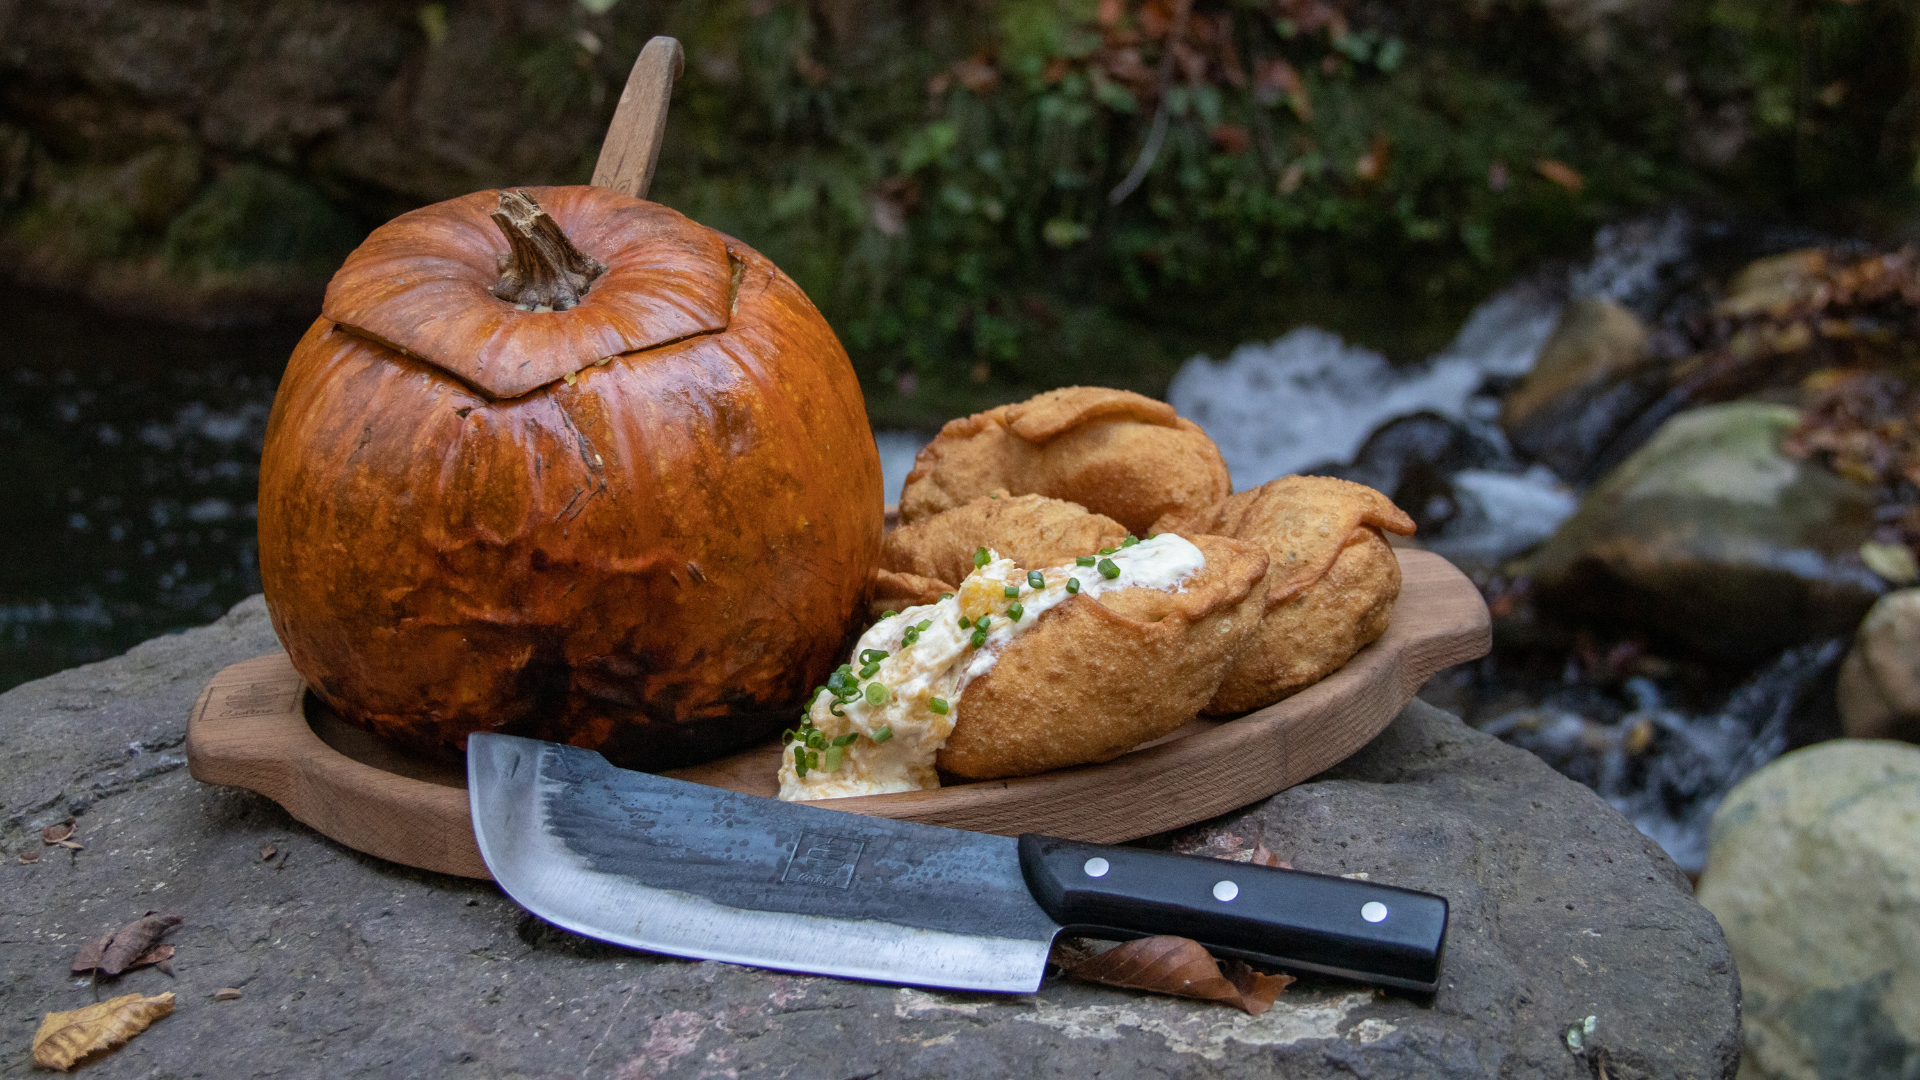 Knife Safety Tips for Carving the Perfect Halloween Pumpkin